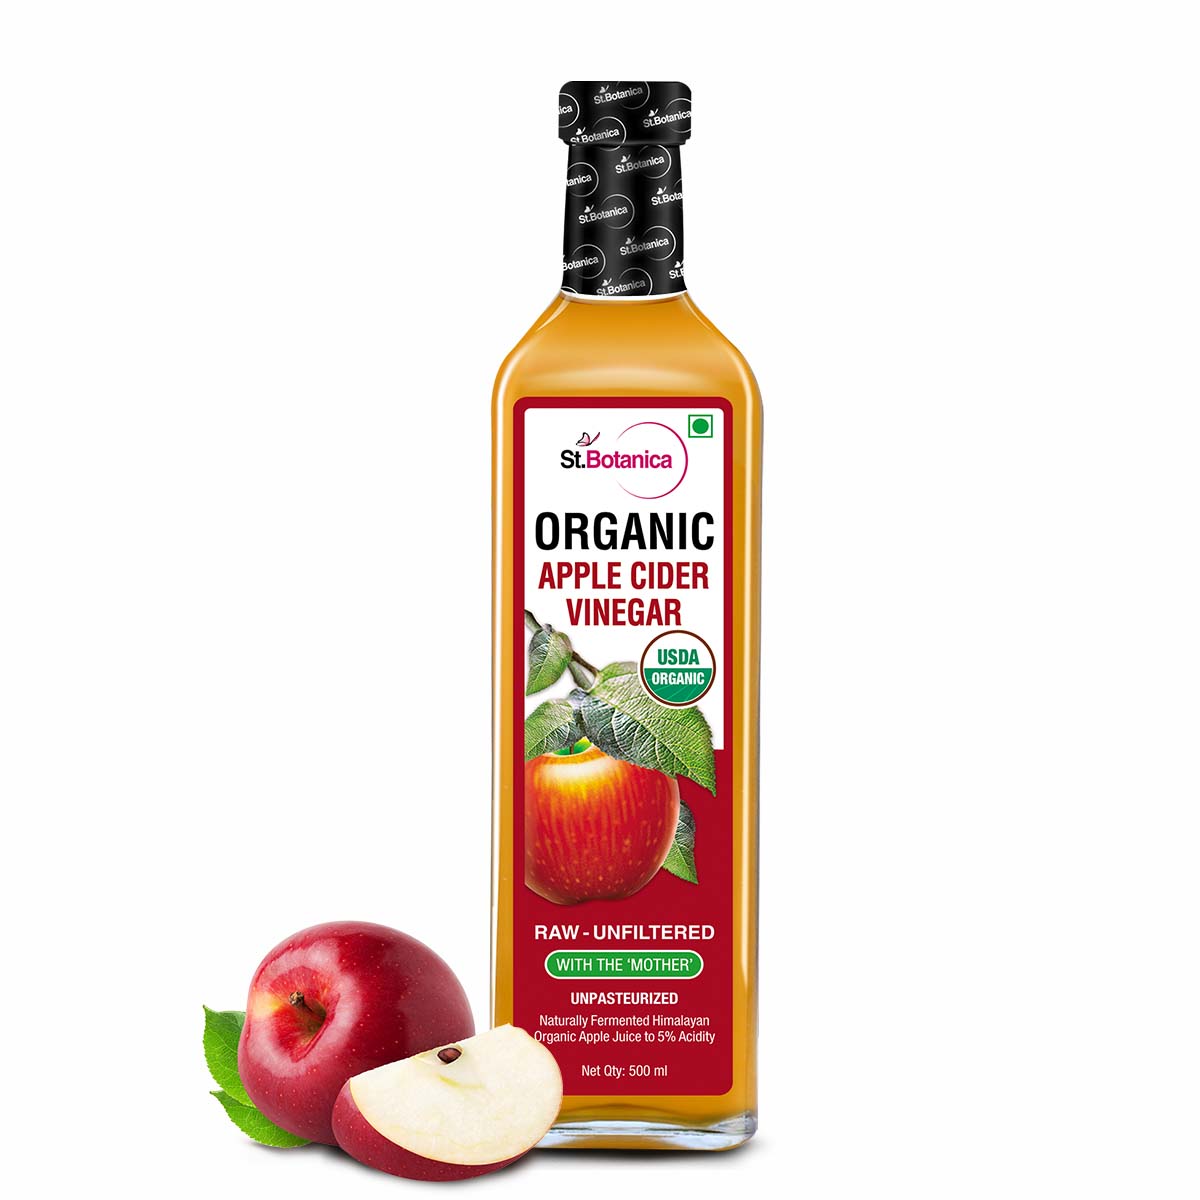 St.Botanica USDA Organic Apple Cider Vinegar With The Mother - Raw, Unfiltered, UnPasteurized - 500ml (Glass Bottle)